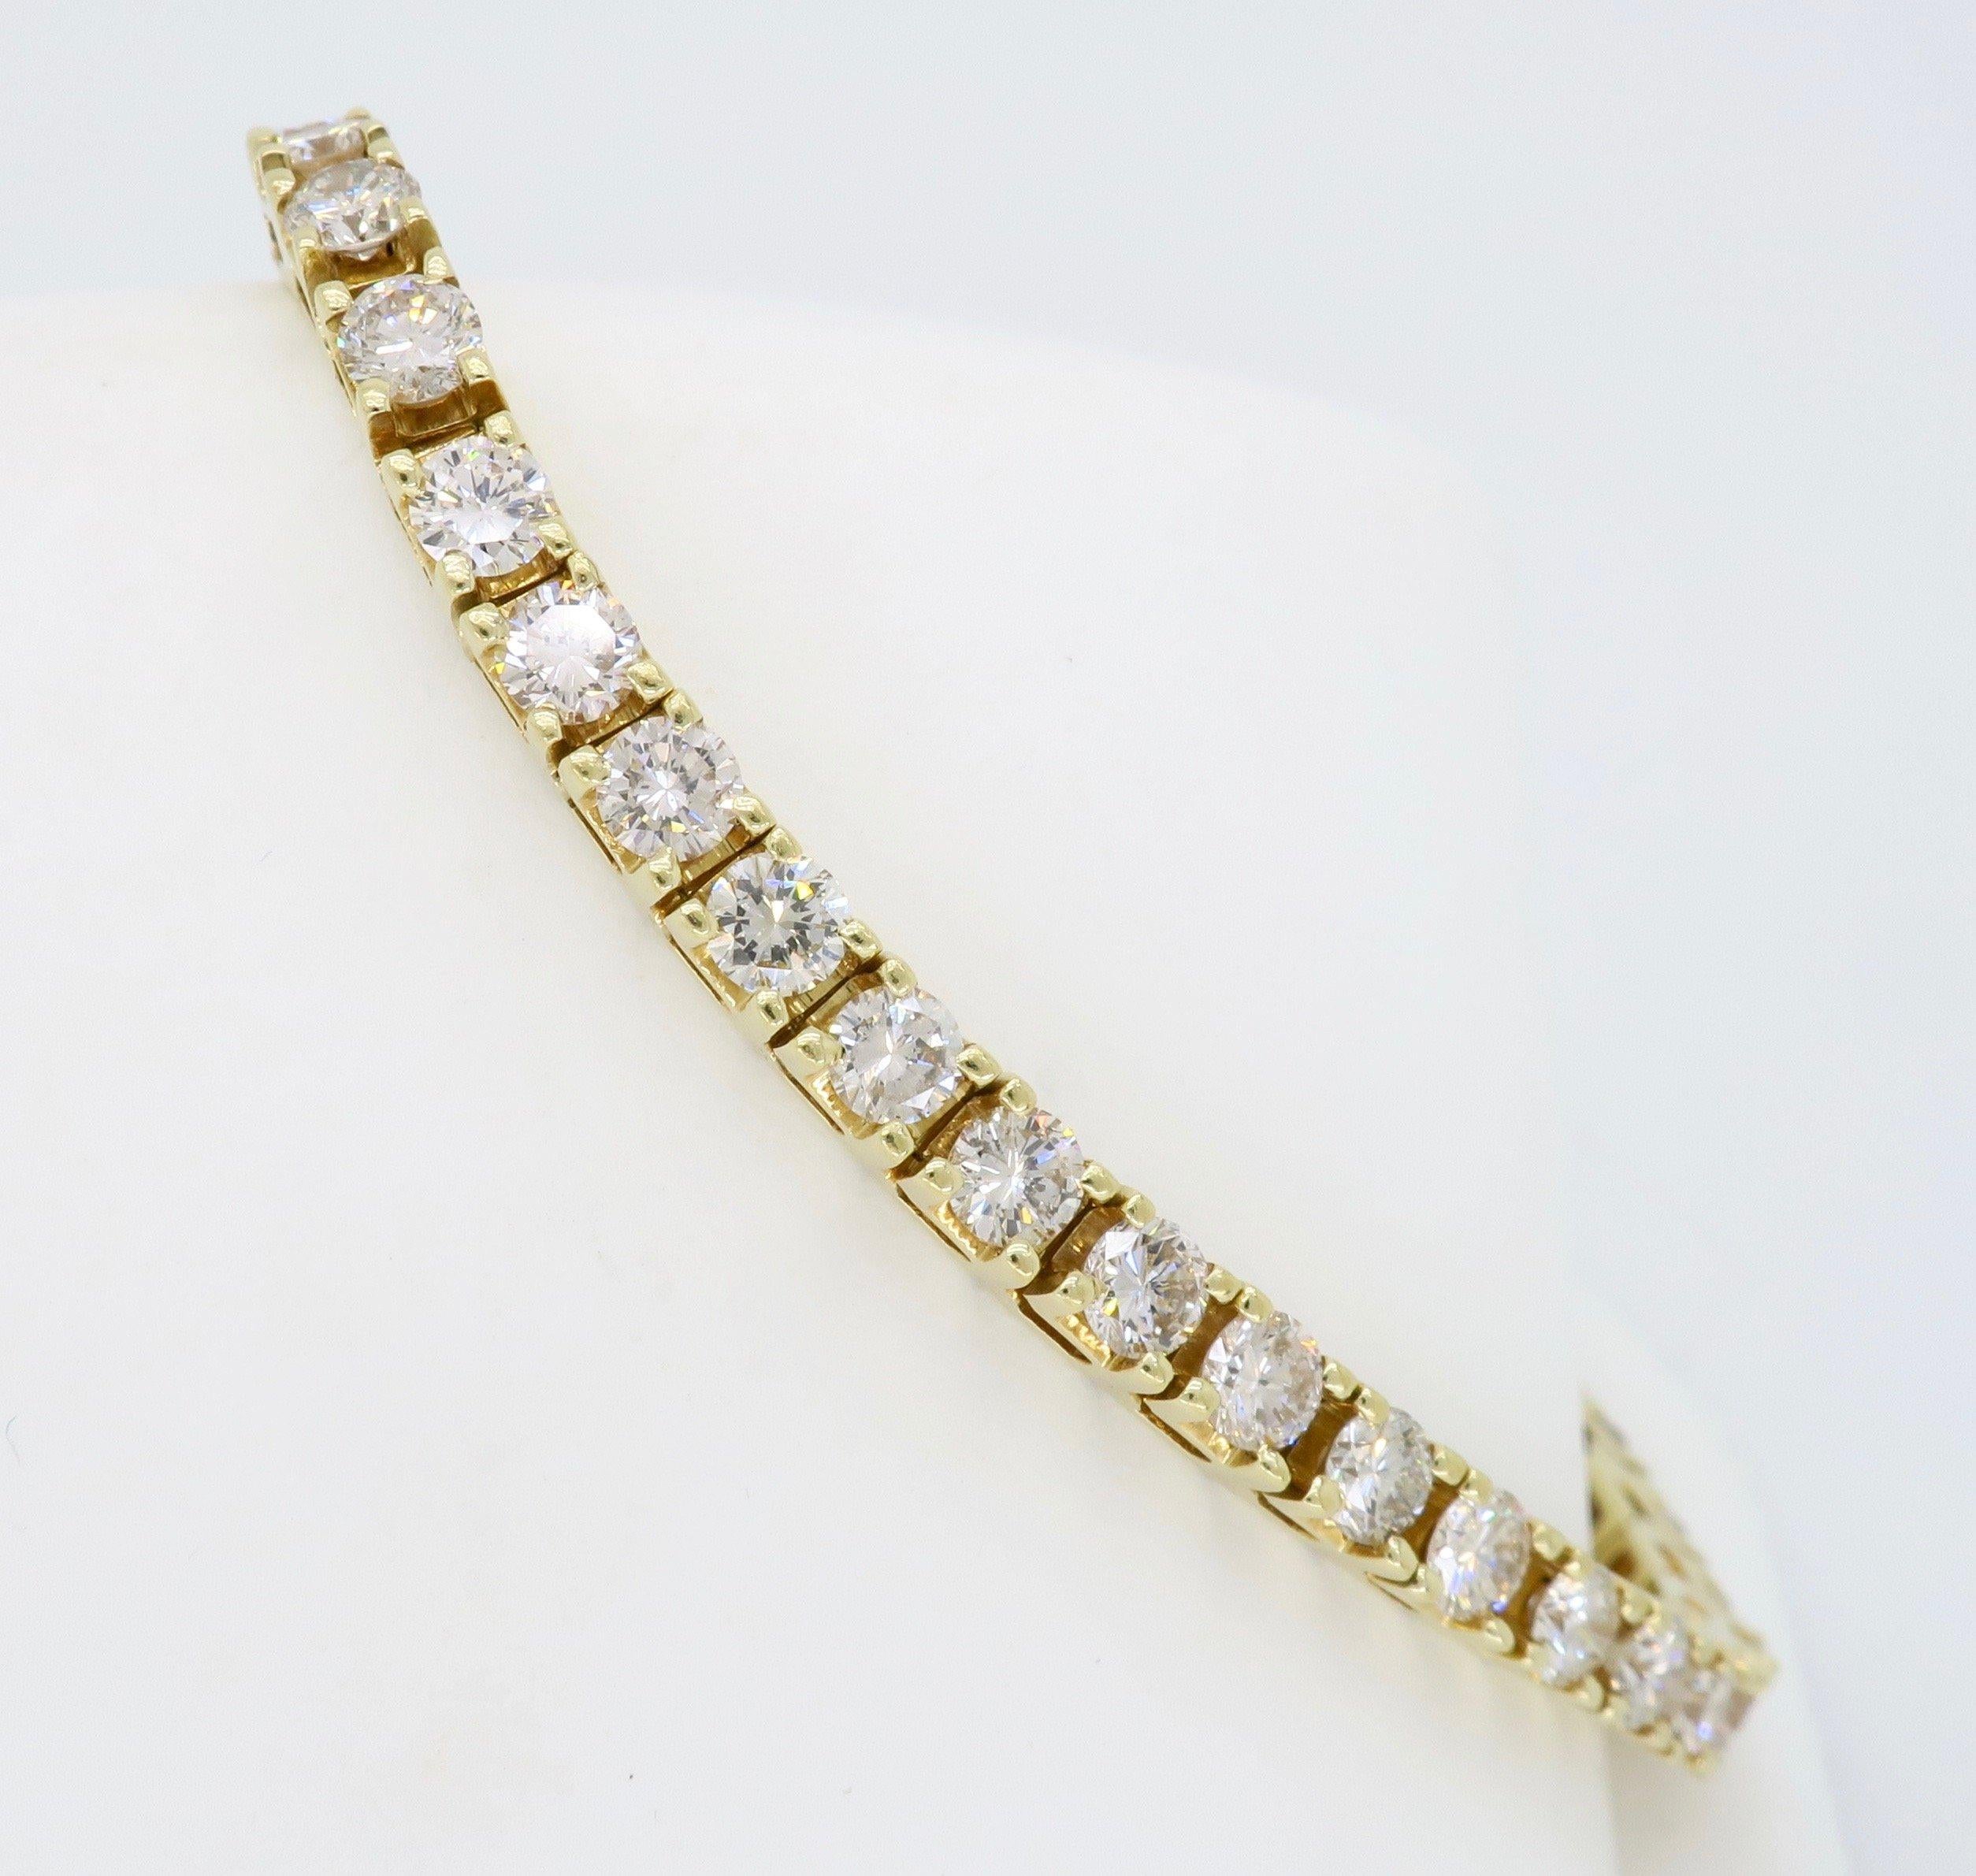 14K yellow gold tennis bracelet mounted with approximately six carats of Round Brilliant Cut diamonds.

Diamond Carat Weight: Approximately 6.00CTW
Diamond Cut: 46 Round Brilliant Cut
Color: Average I-K
Clarity: Average VS-SI
Metal: 14K Yellow